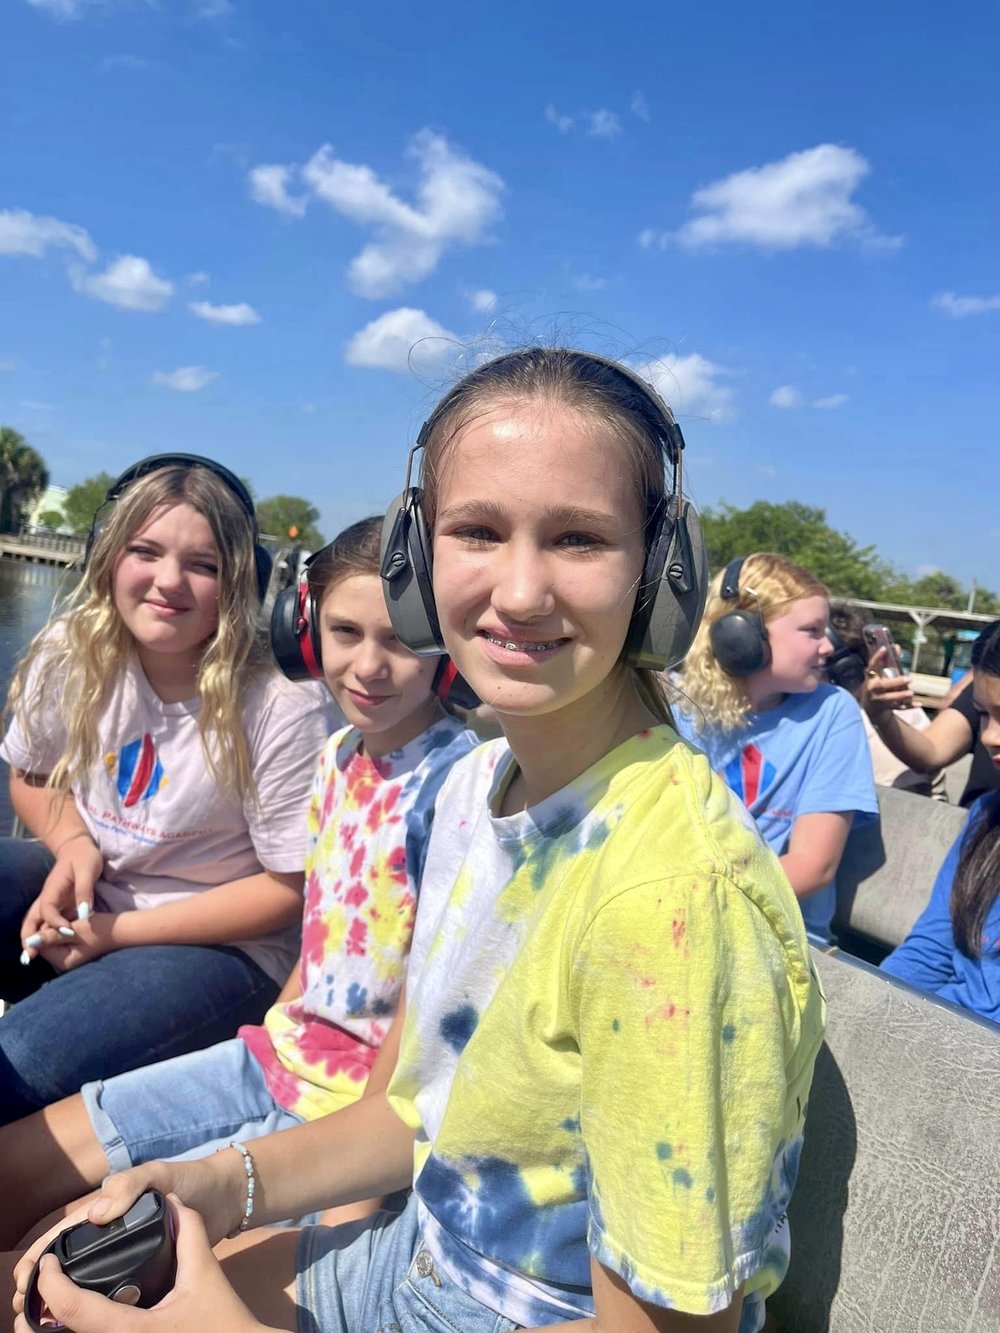 Middle School students enjoy airboat tour on field trip to Wooten’s Everglades Airboat Tours - Educational Pathways Academy, School for dyslexia in Florida.jpeg